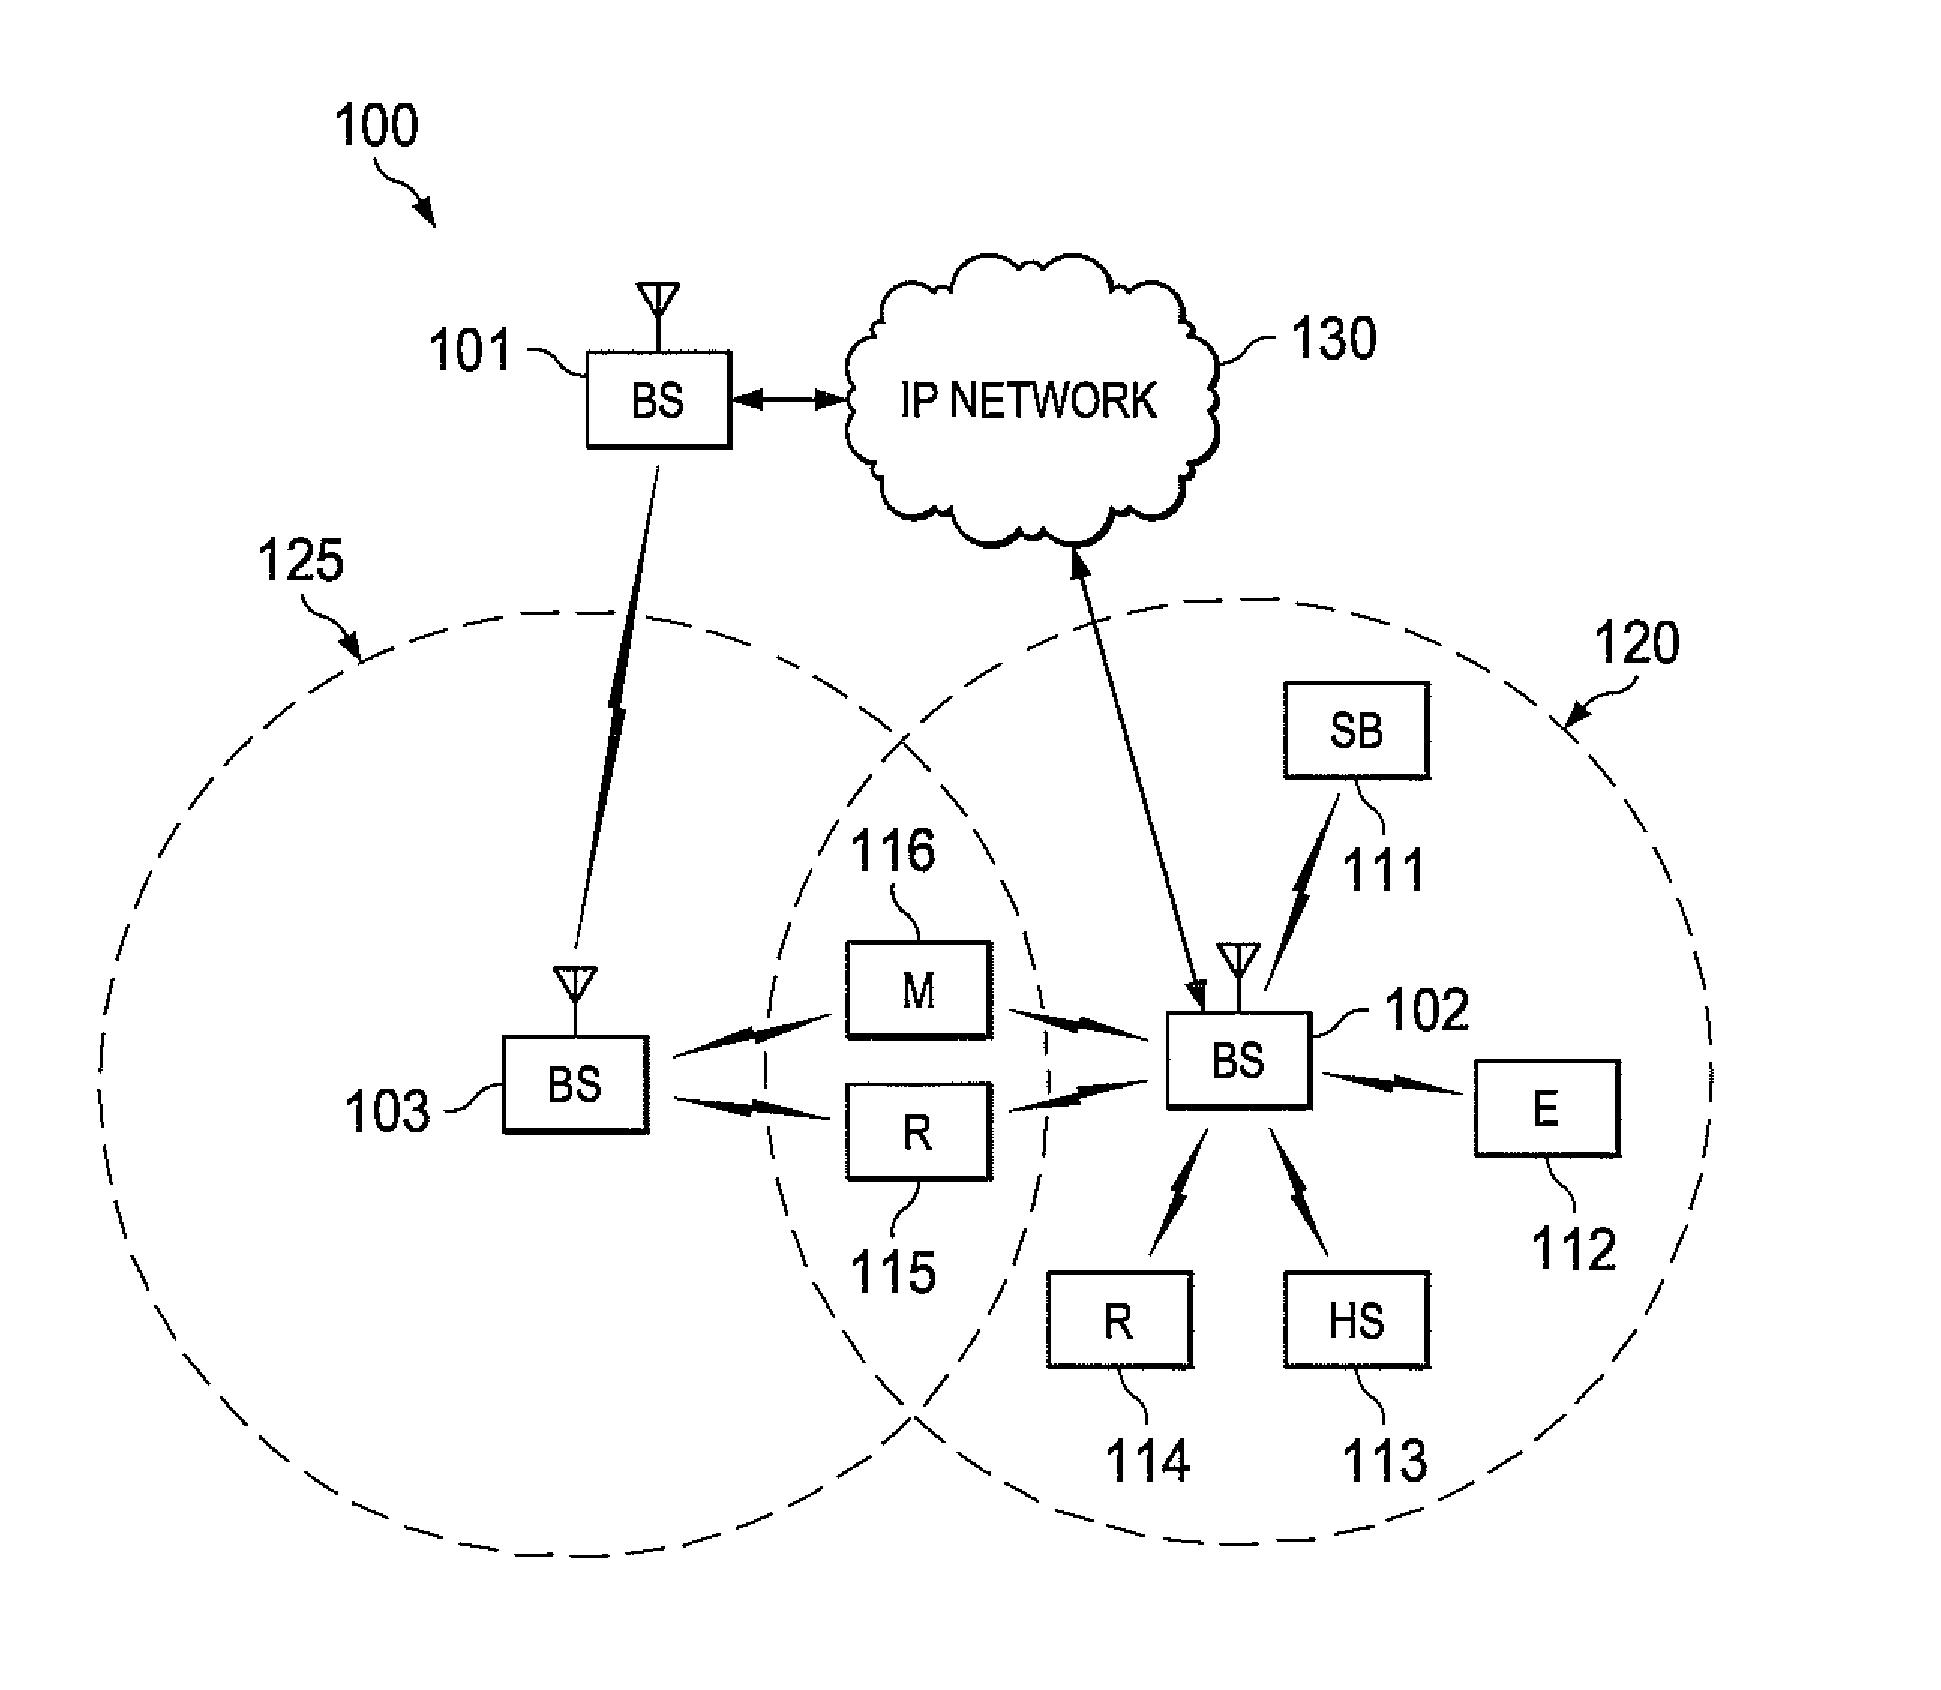 Systems and methods for transmitting channel quality information in wireless communication systems